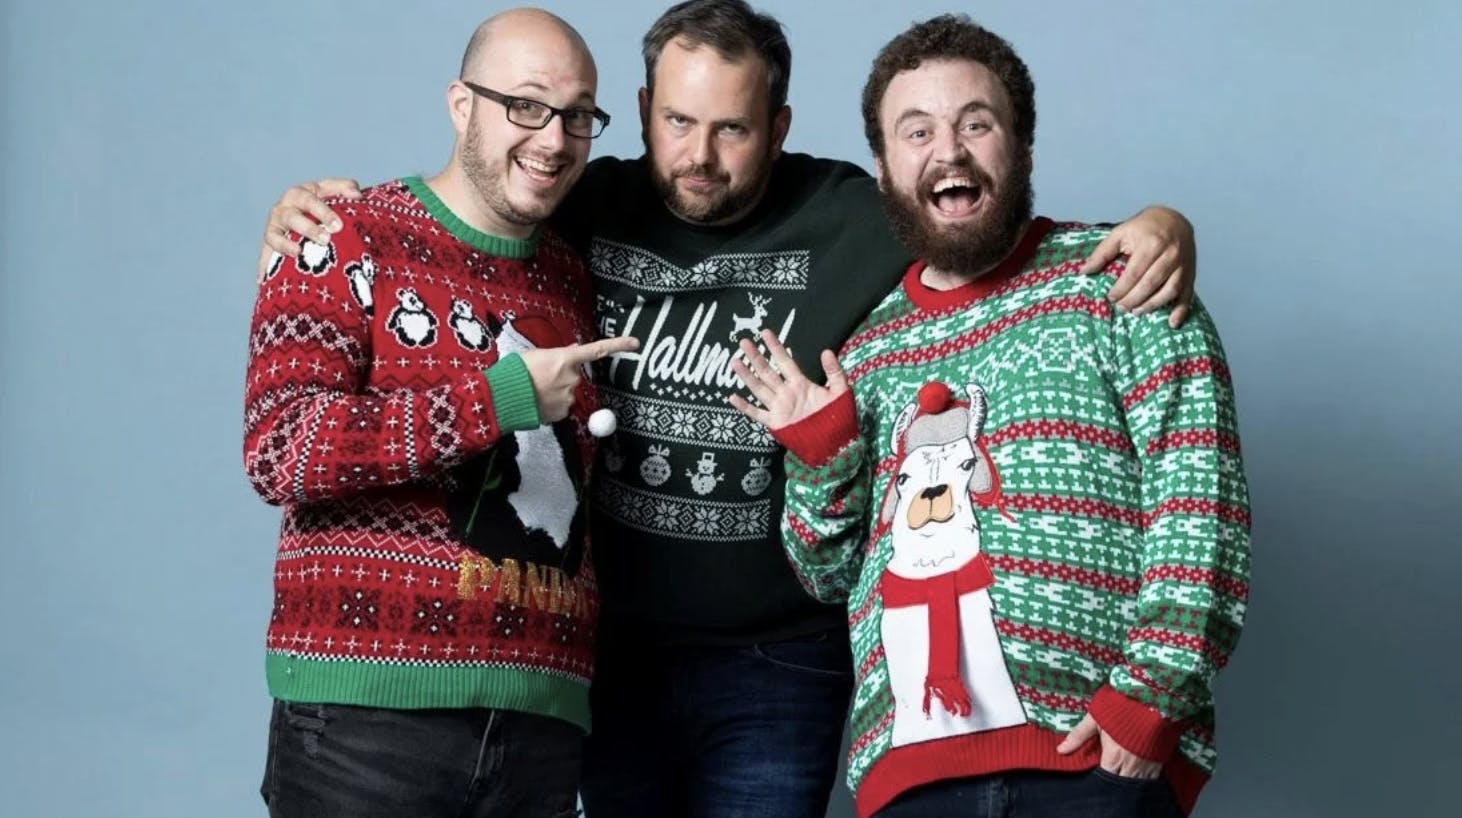 Hallmark and Chill: Christmas Movies with the guys from Deck the Hallmark 